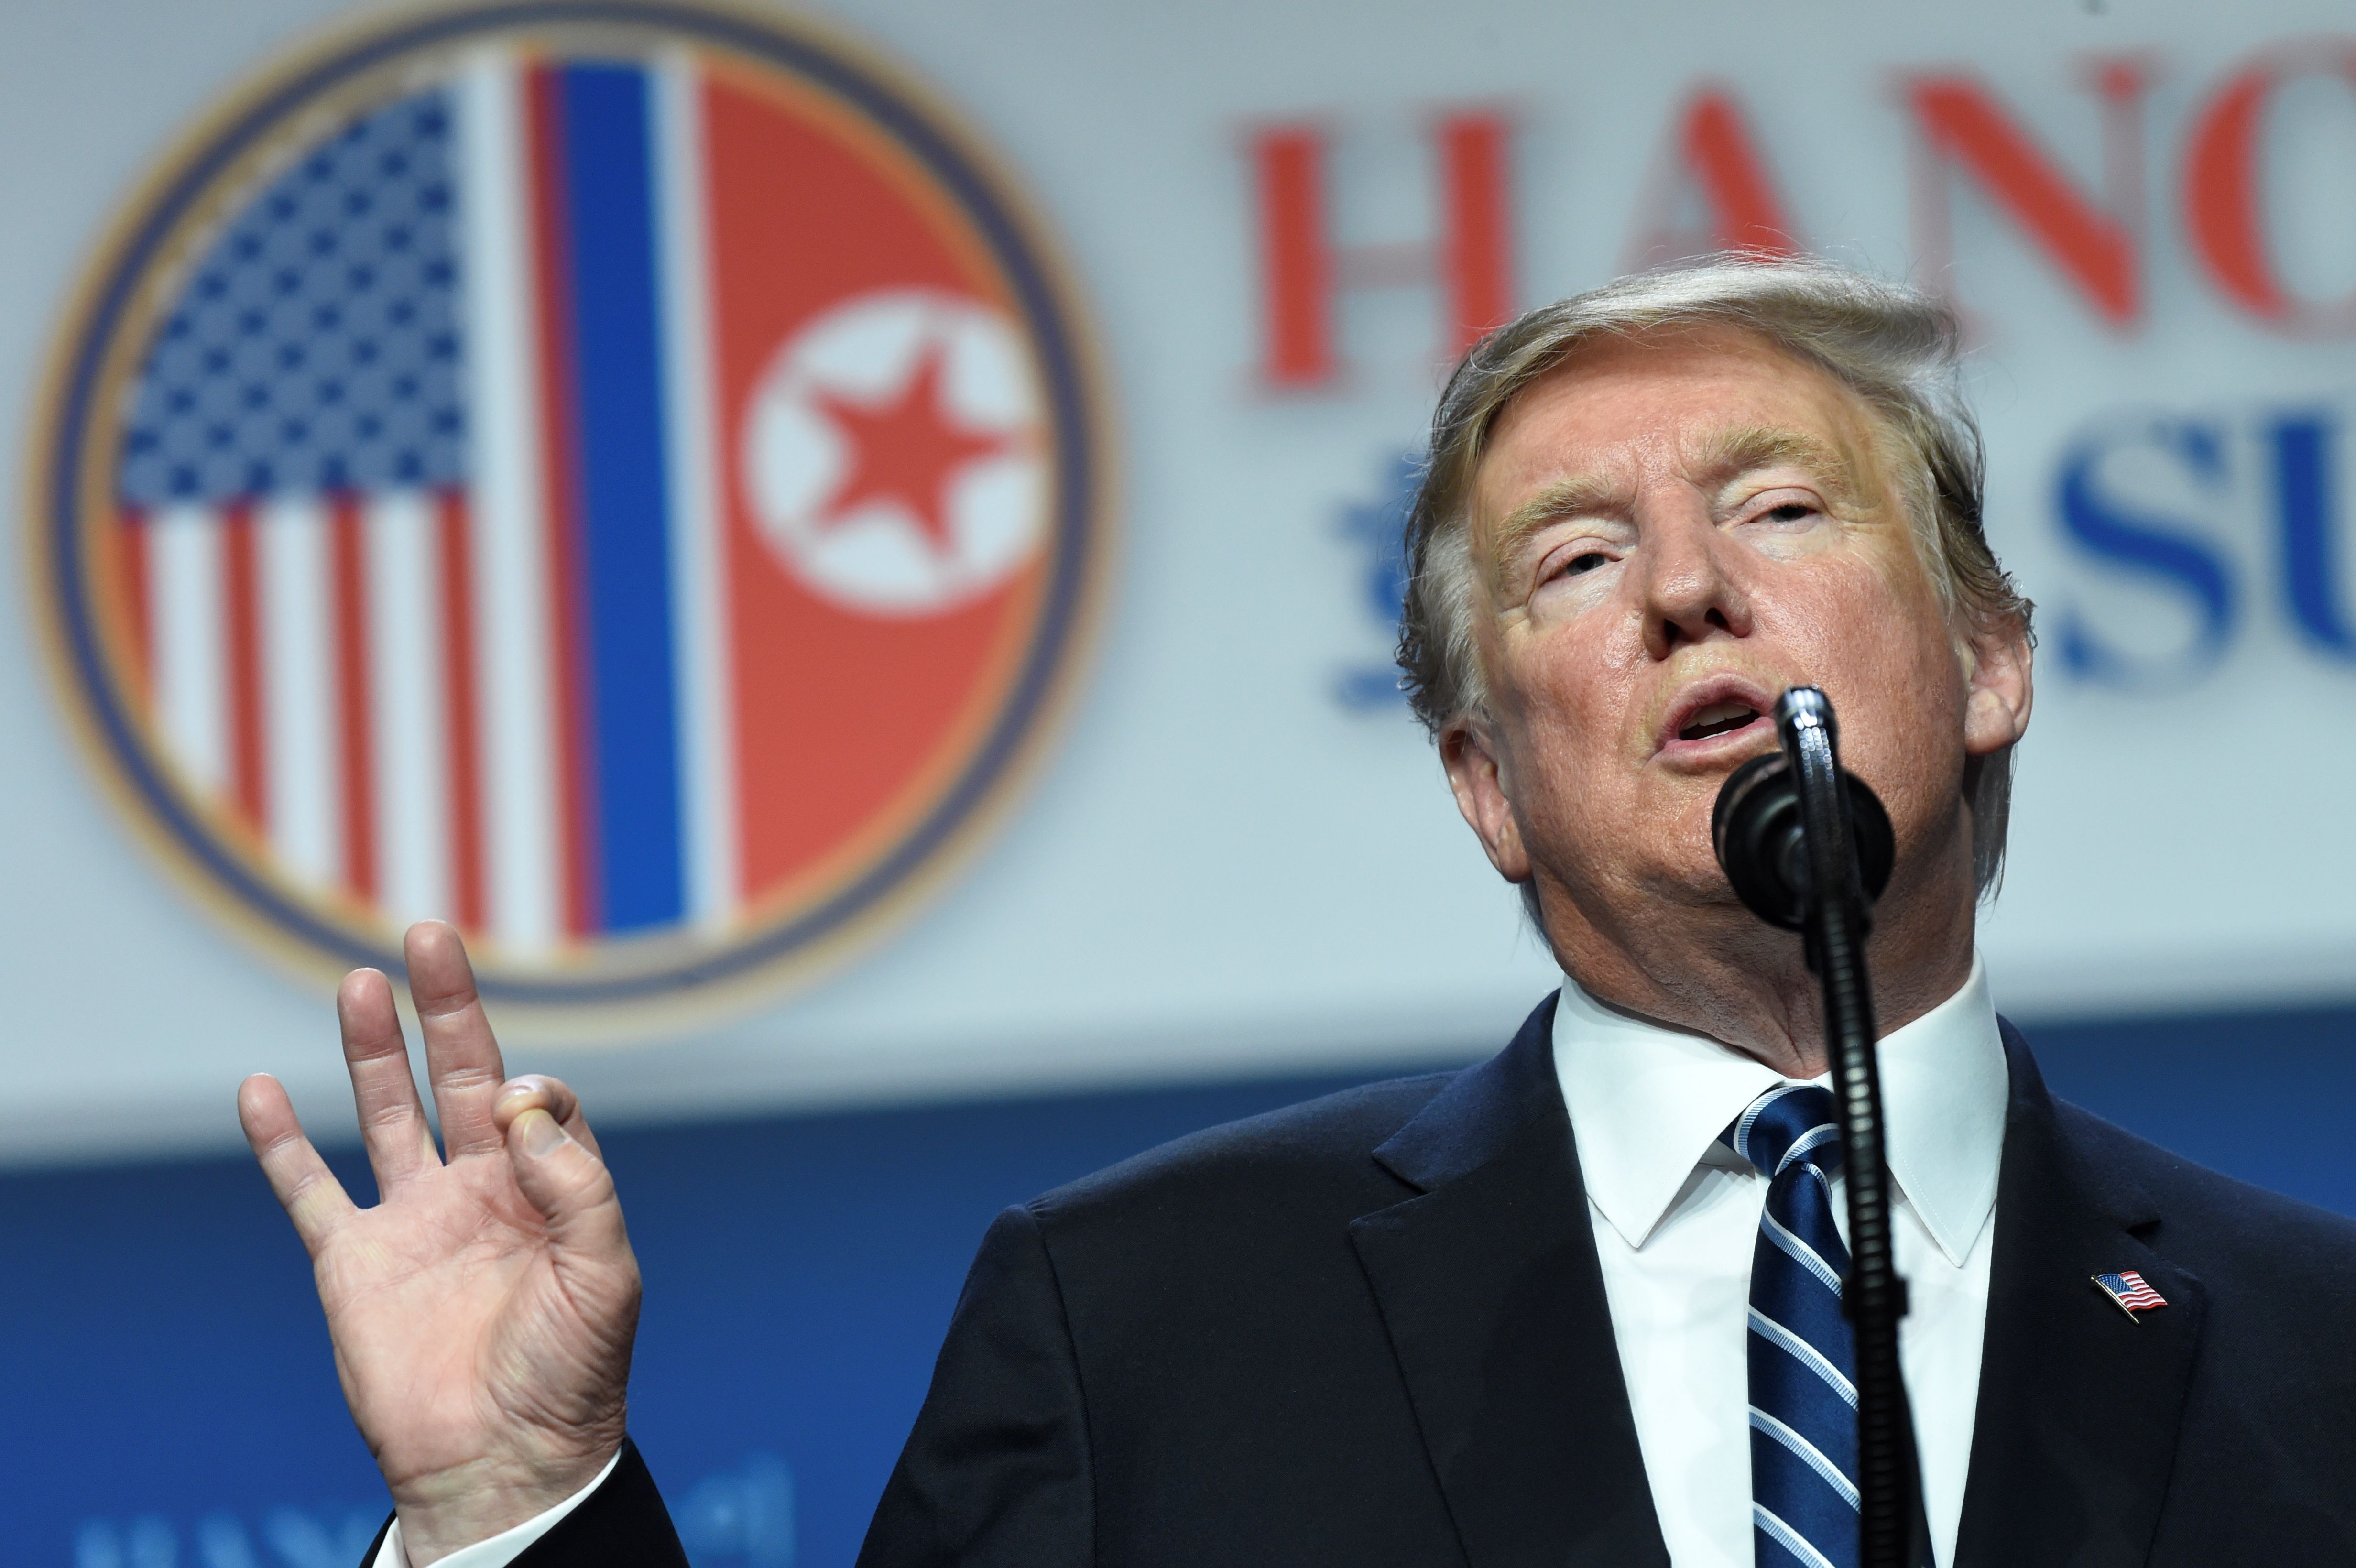 US President Donald Trump speaks during a press conference following the second US-North Korea summit in Hanoi on February 28, 2019. - The nuclear summit between US President Donald Trump and Kim Jong Un in Hanoi ended without an agreement on February 28, the White House said after the two leaders cut short their discussions. (Photo by SAUL LOEB/AFP/Getty Images)